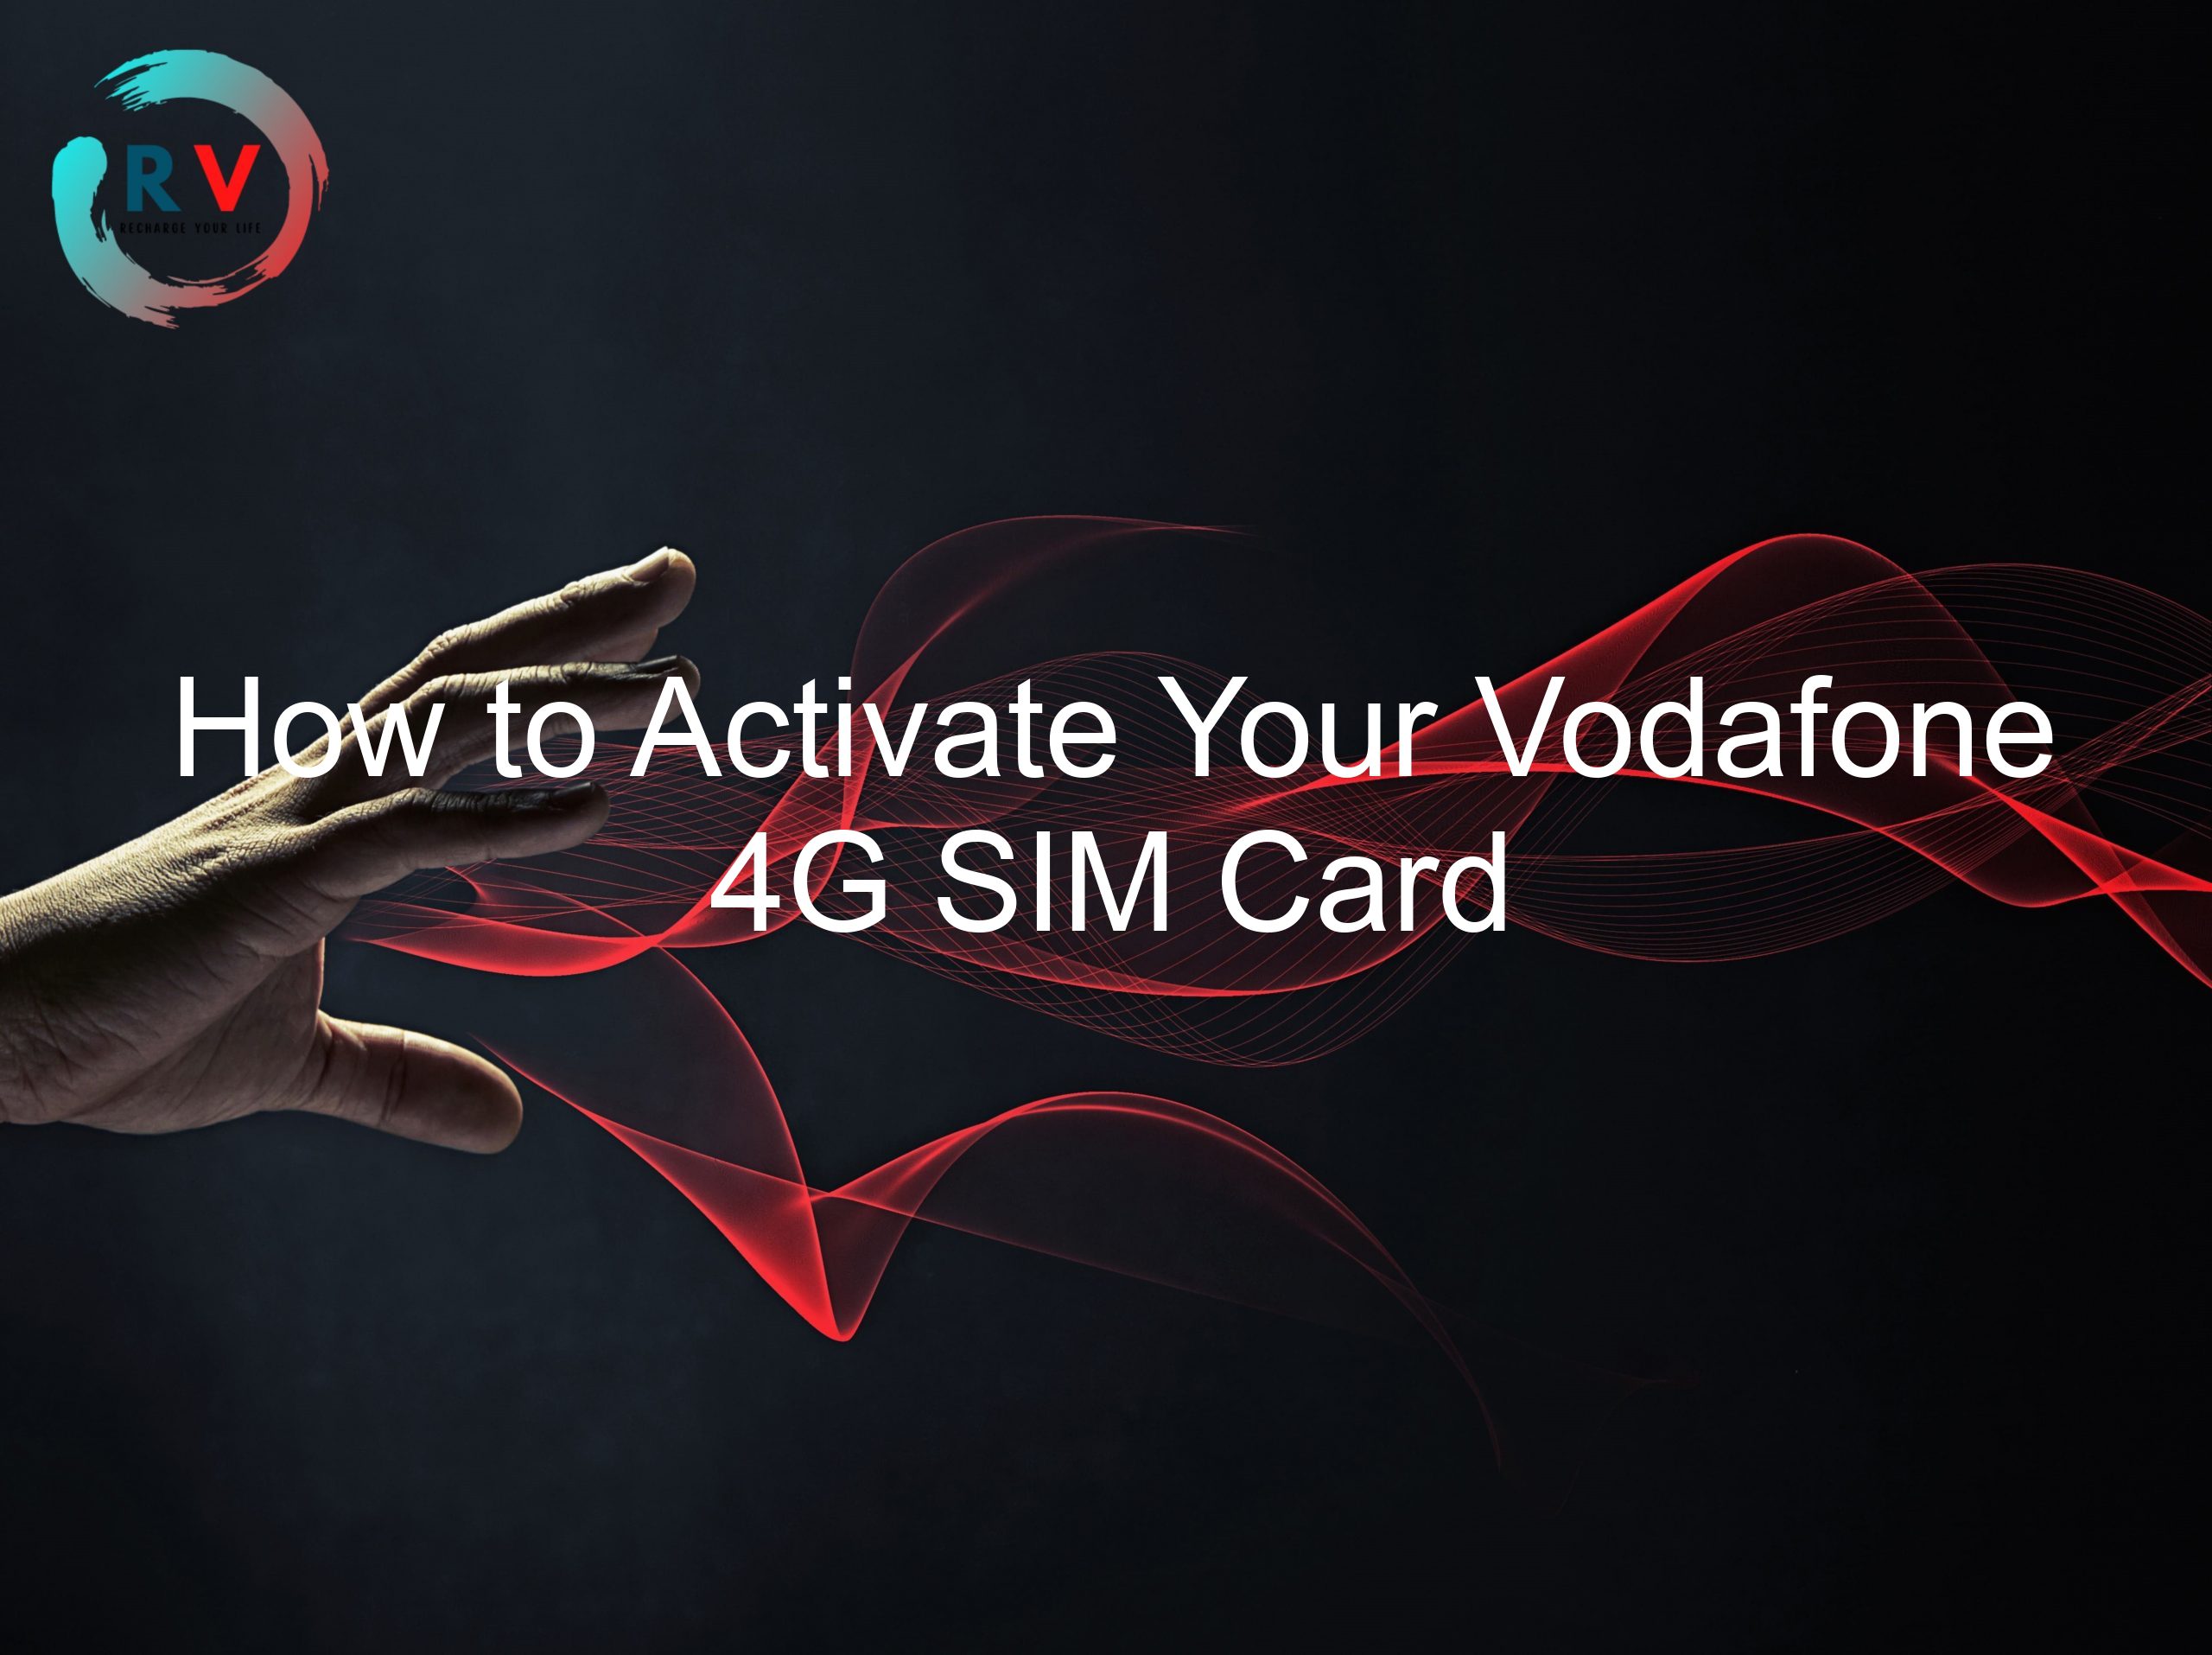 How to Activate Your Vodafone 4G SIM Card